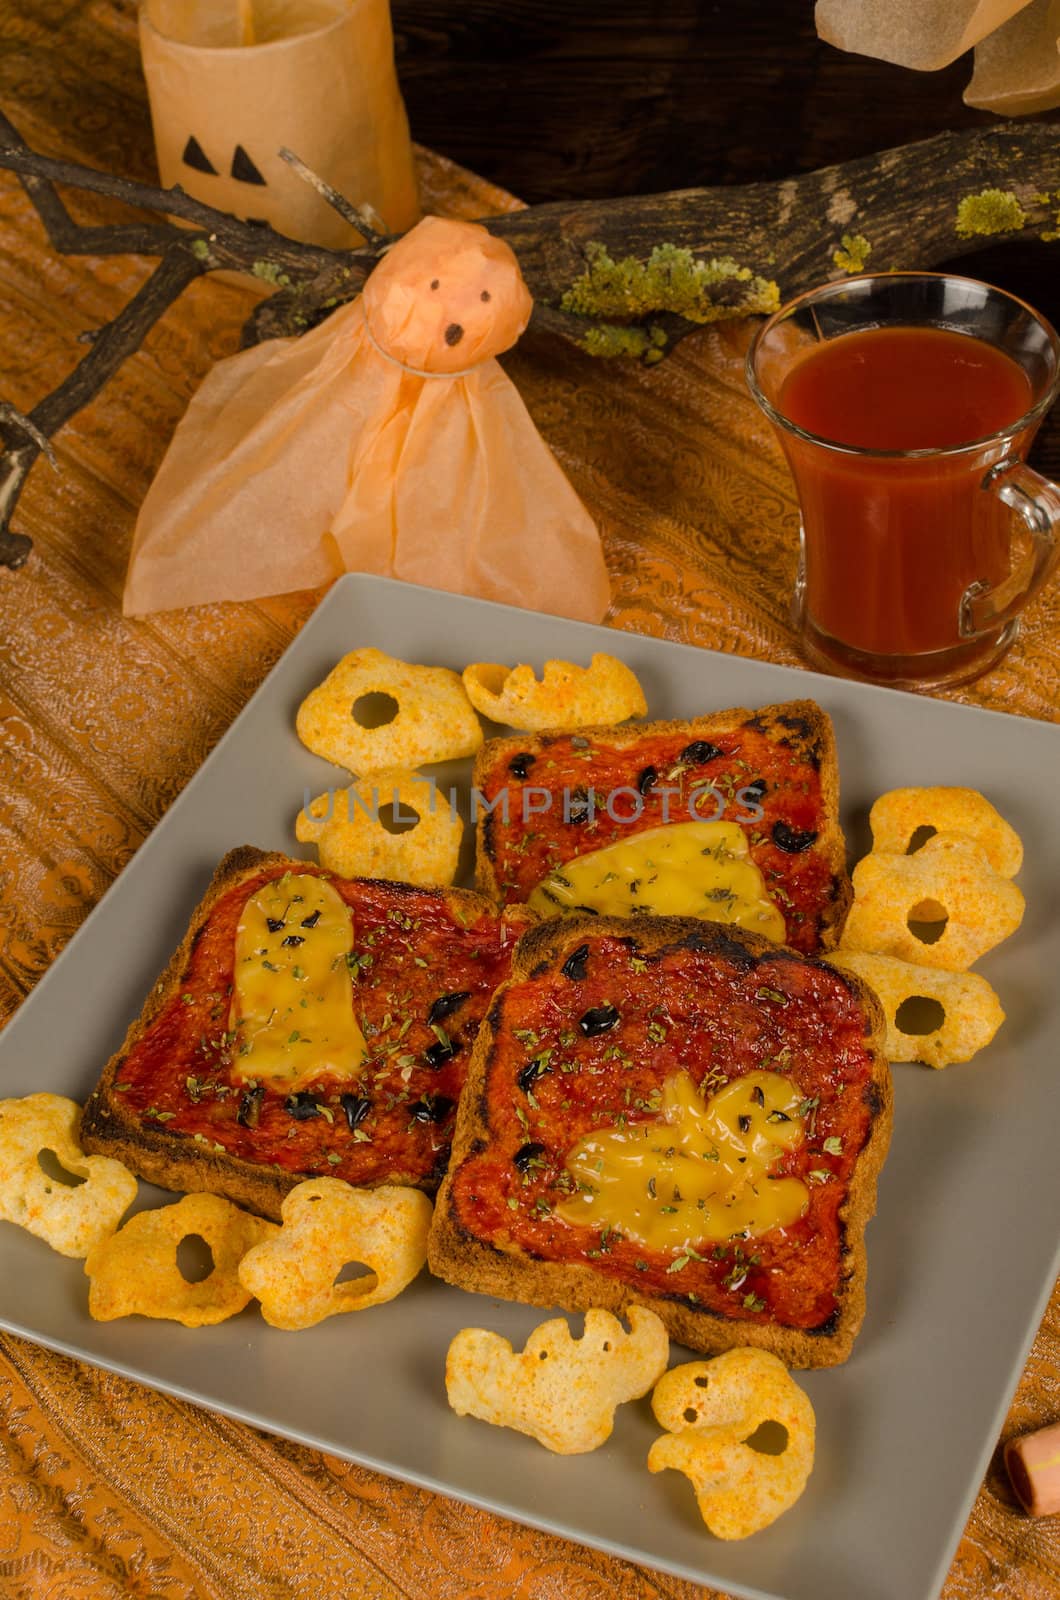 Slices of toast prepared and decorated for a kid Halloween party